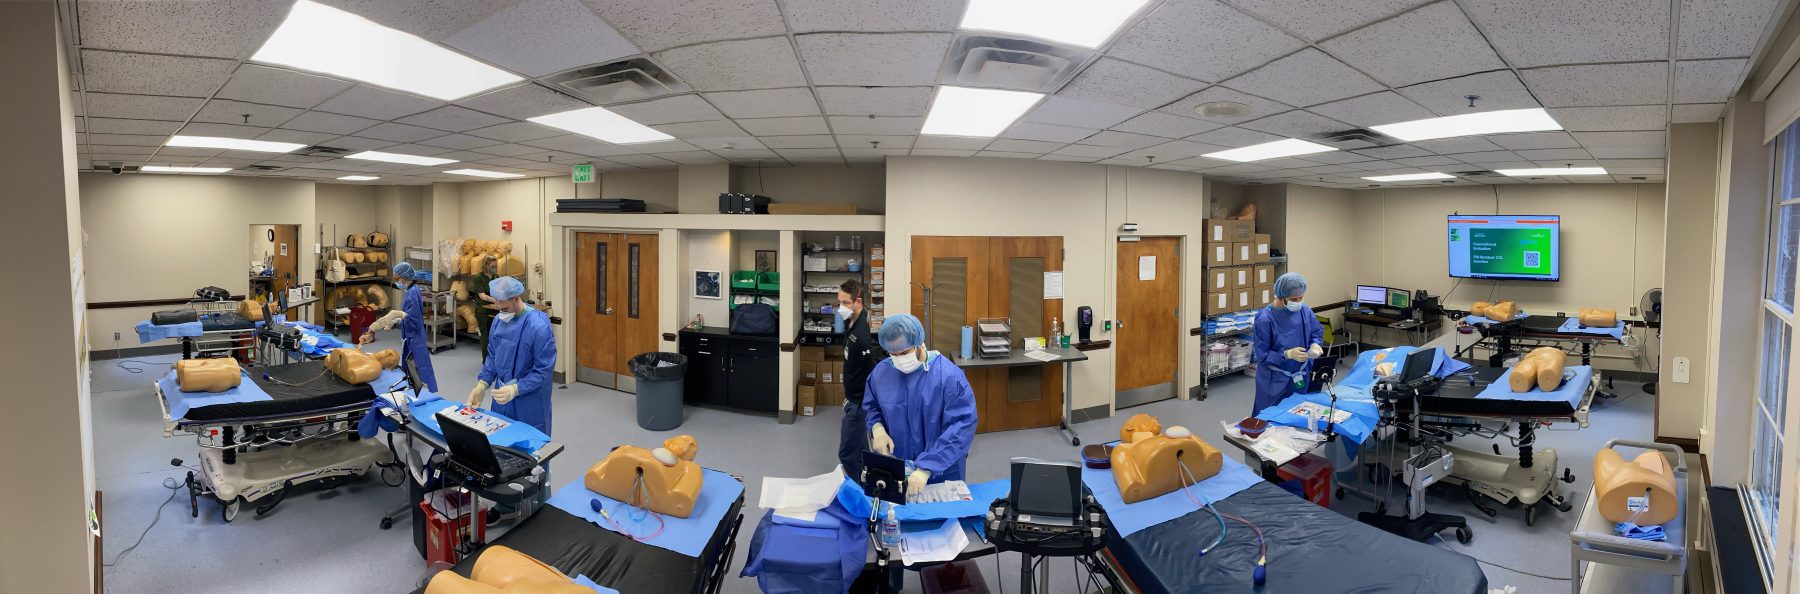 panoramic image of clinical simulation